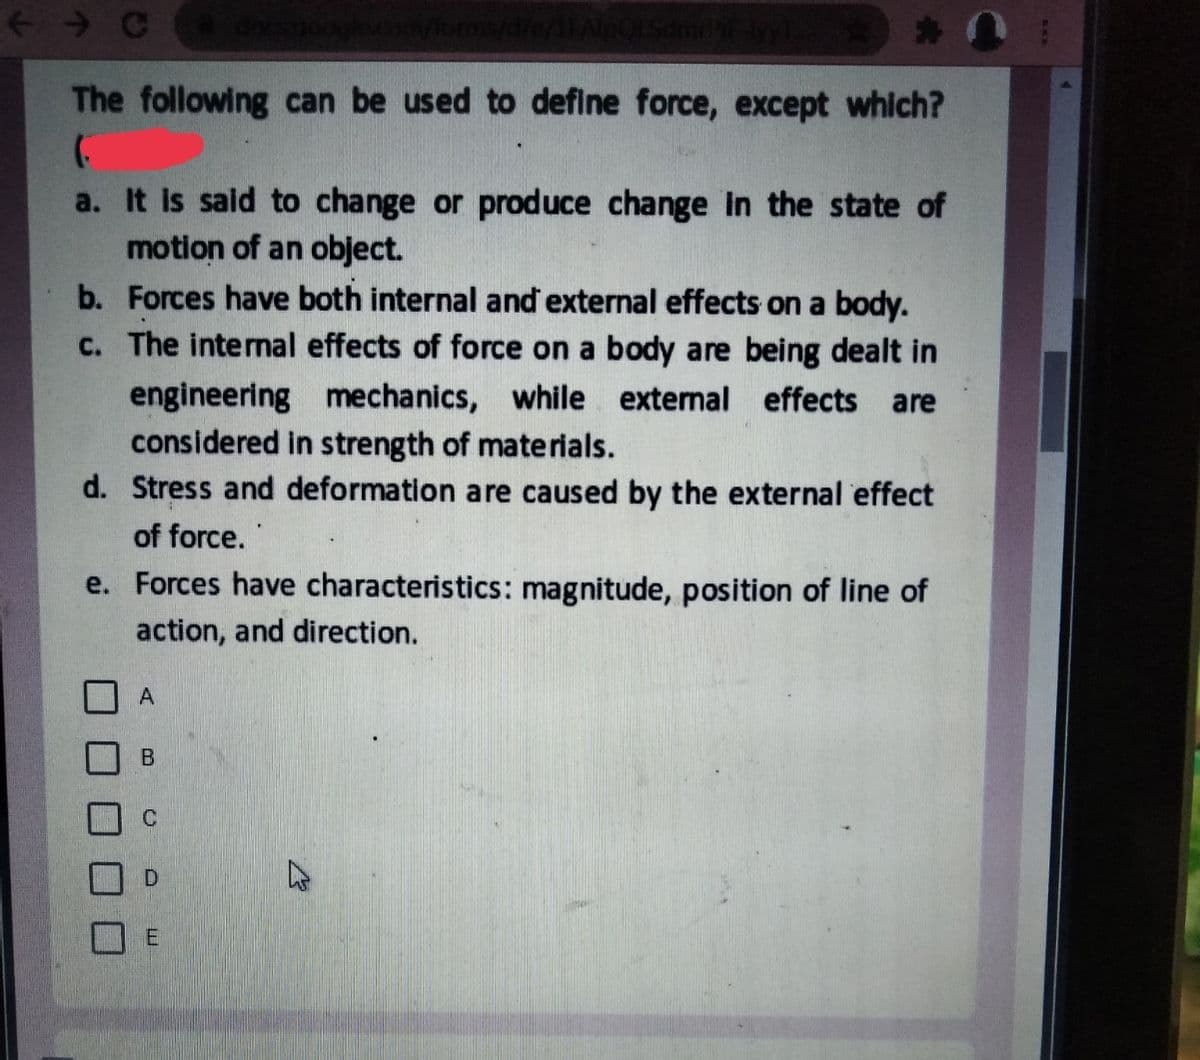 < → C
The following can be used to define force, except which?
a. It is said to change or produce change in the state of
motion of an object.
b. Forces have both internal and external effects on a body.
c. The internal effects of force on a body are being dealt in
engineering mechanics, while extenal effects are
considered in strength of materials.
d. Stress and deformation are caused by the external effect
of force.
e. Forces have characteristics: magnitude, position of line of
action, and direction.
A
